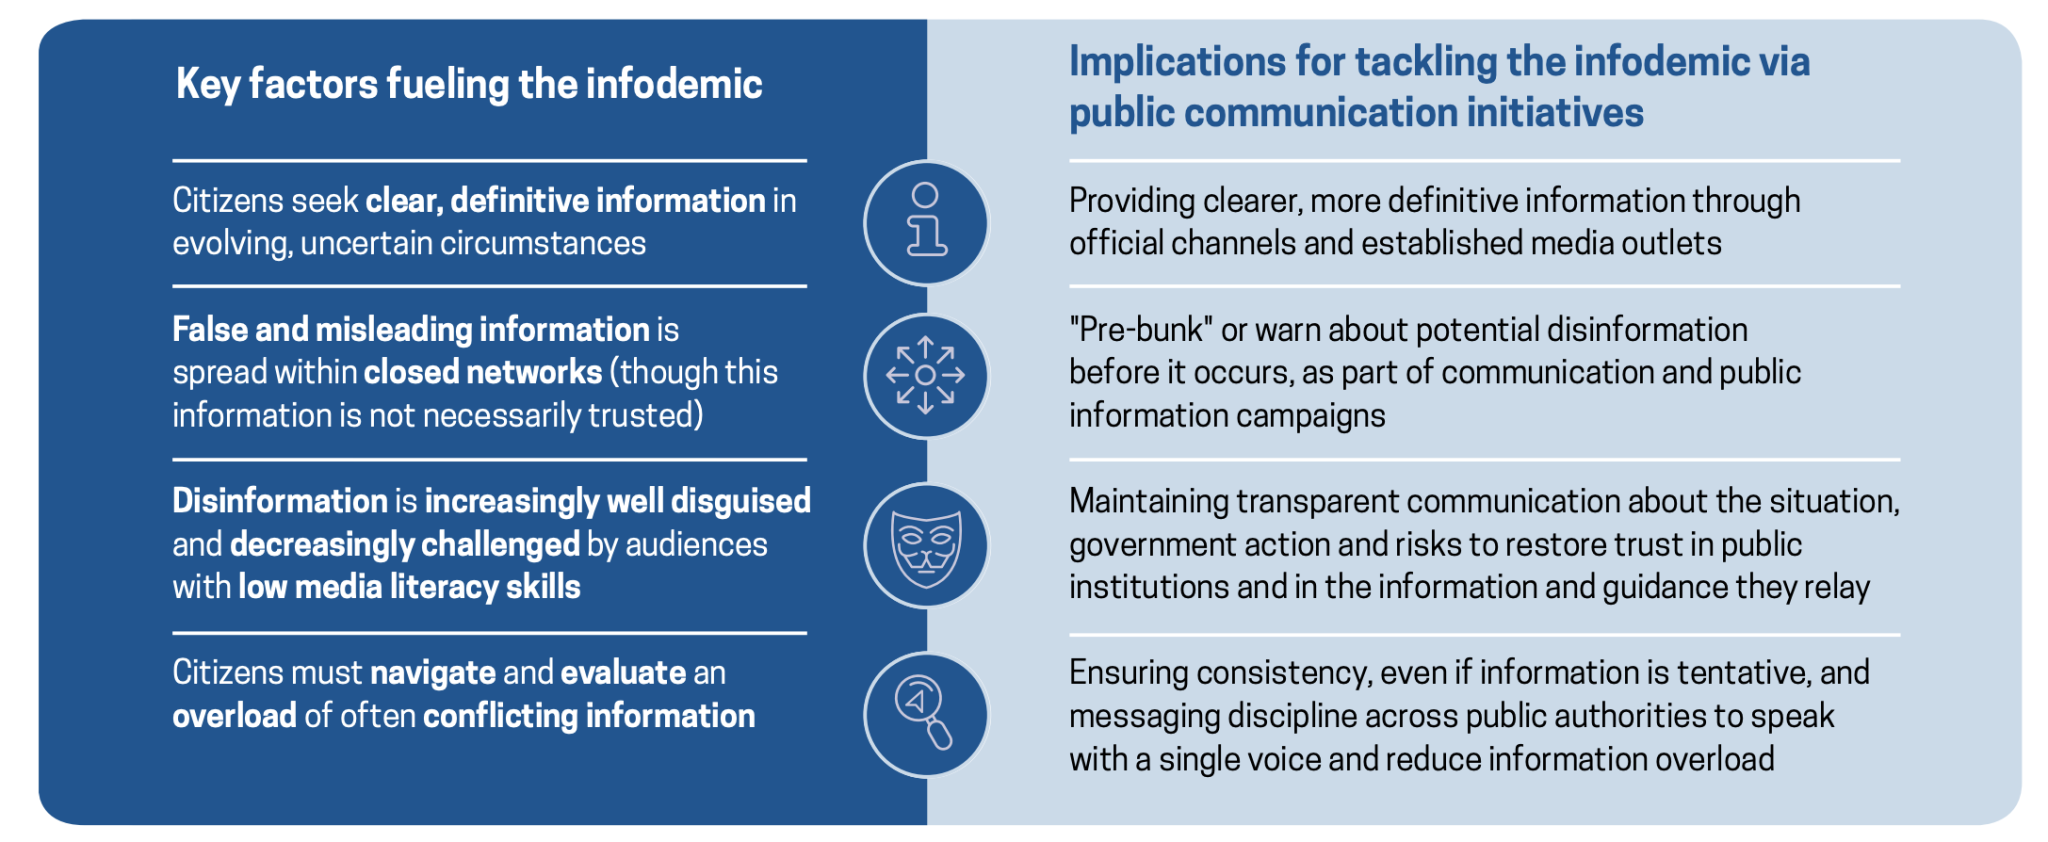 Key factors fueling the infodemic; Implications for tackling the infodemic via public communication initiatives